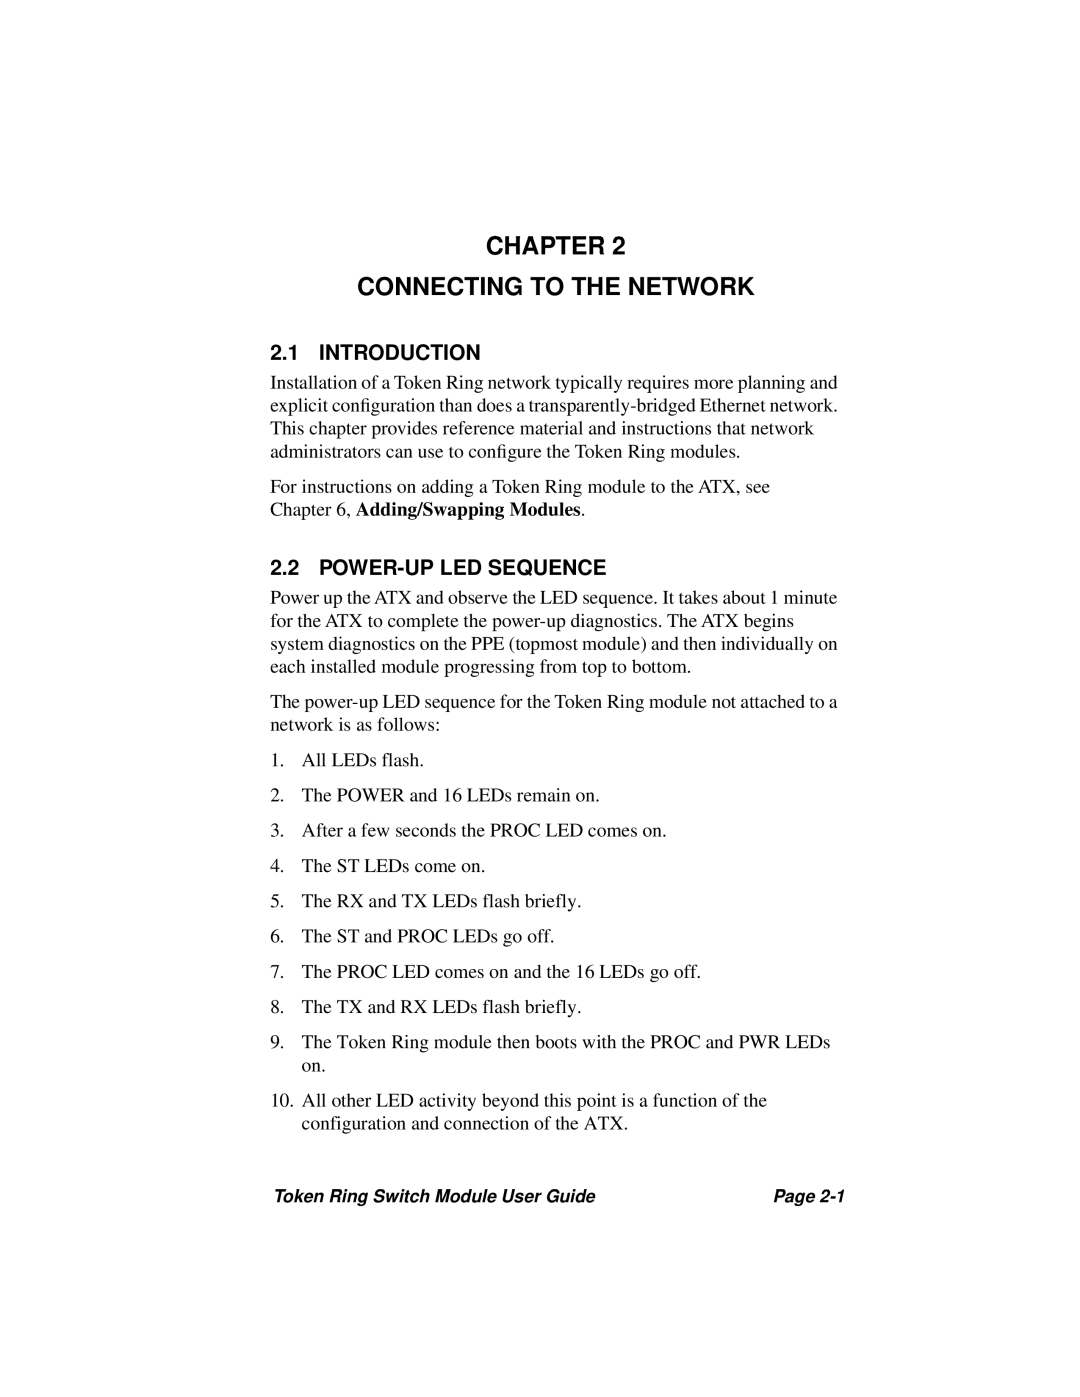 Cabletron Systems 3T02-04 manual Chapter Connecting To The Network, Introduction, Power-Up Led Sequence 